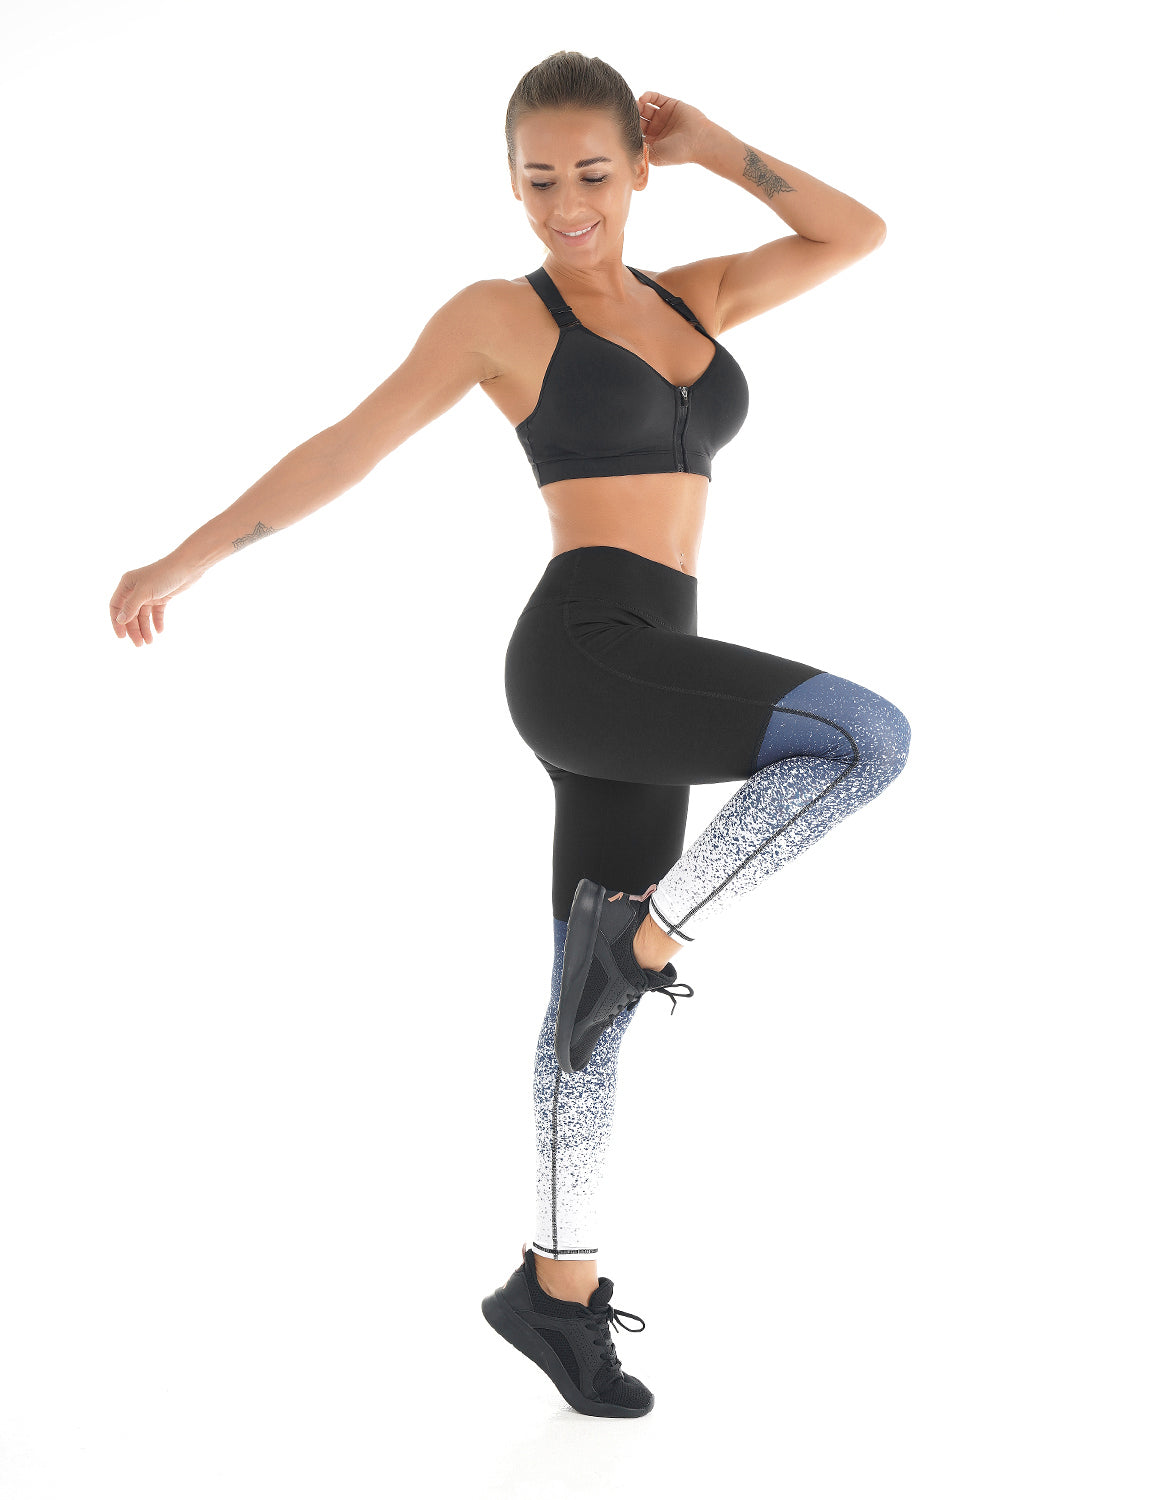 Blooming Jelly_Splashed High Waisted Training Leggings_Black_256088_21_Women Athletic Comfy Outfits_Bottoms_Leggings